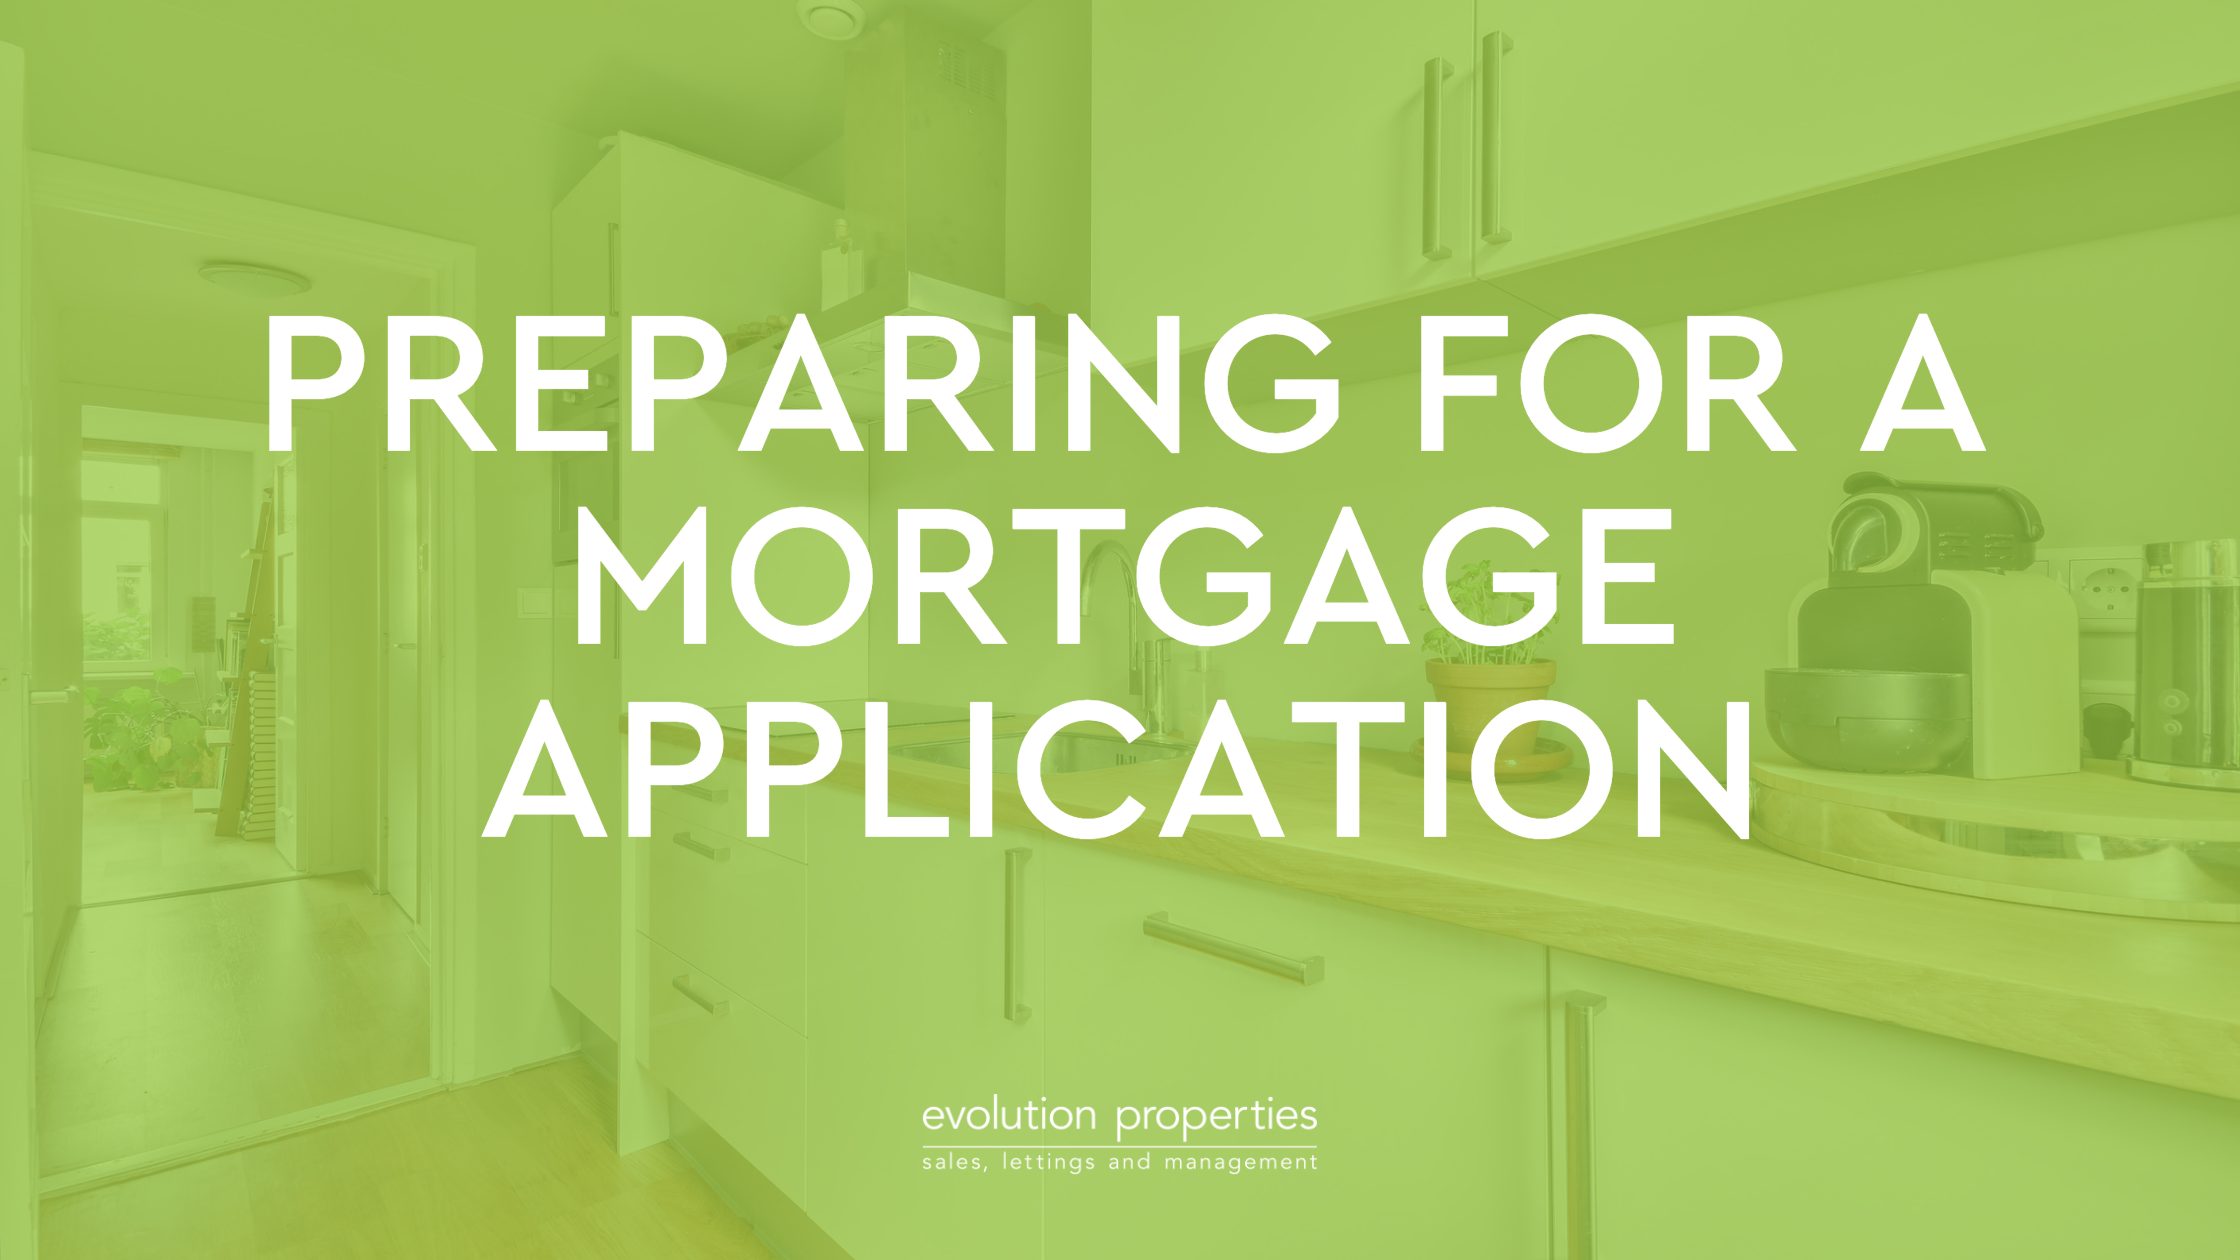 Preparing for a mortgage application